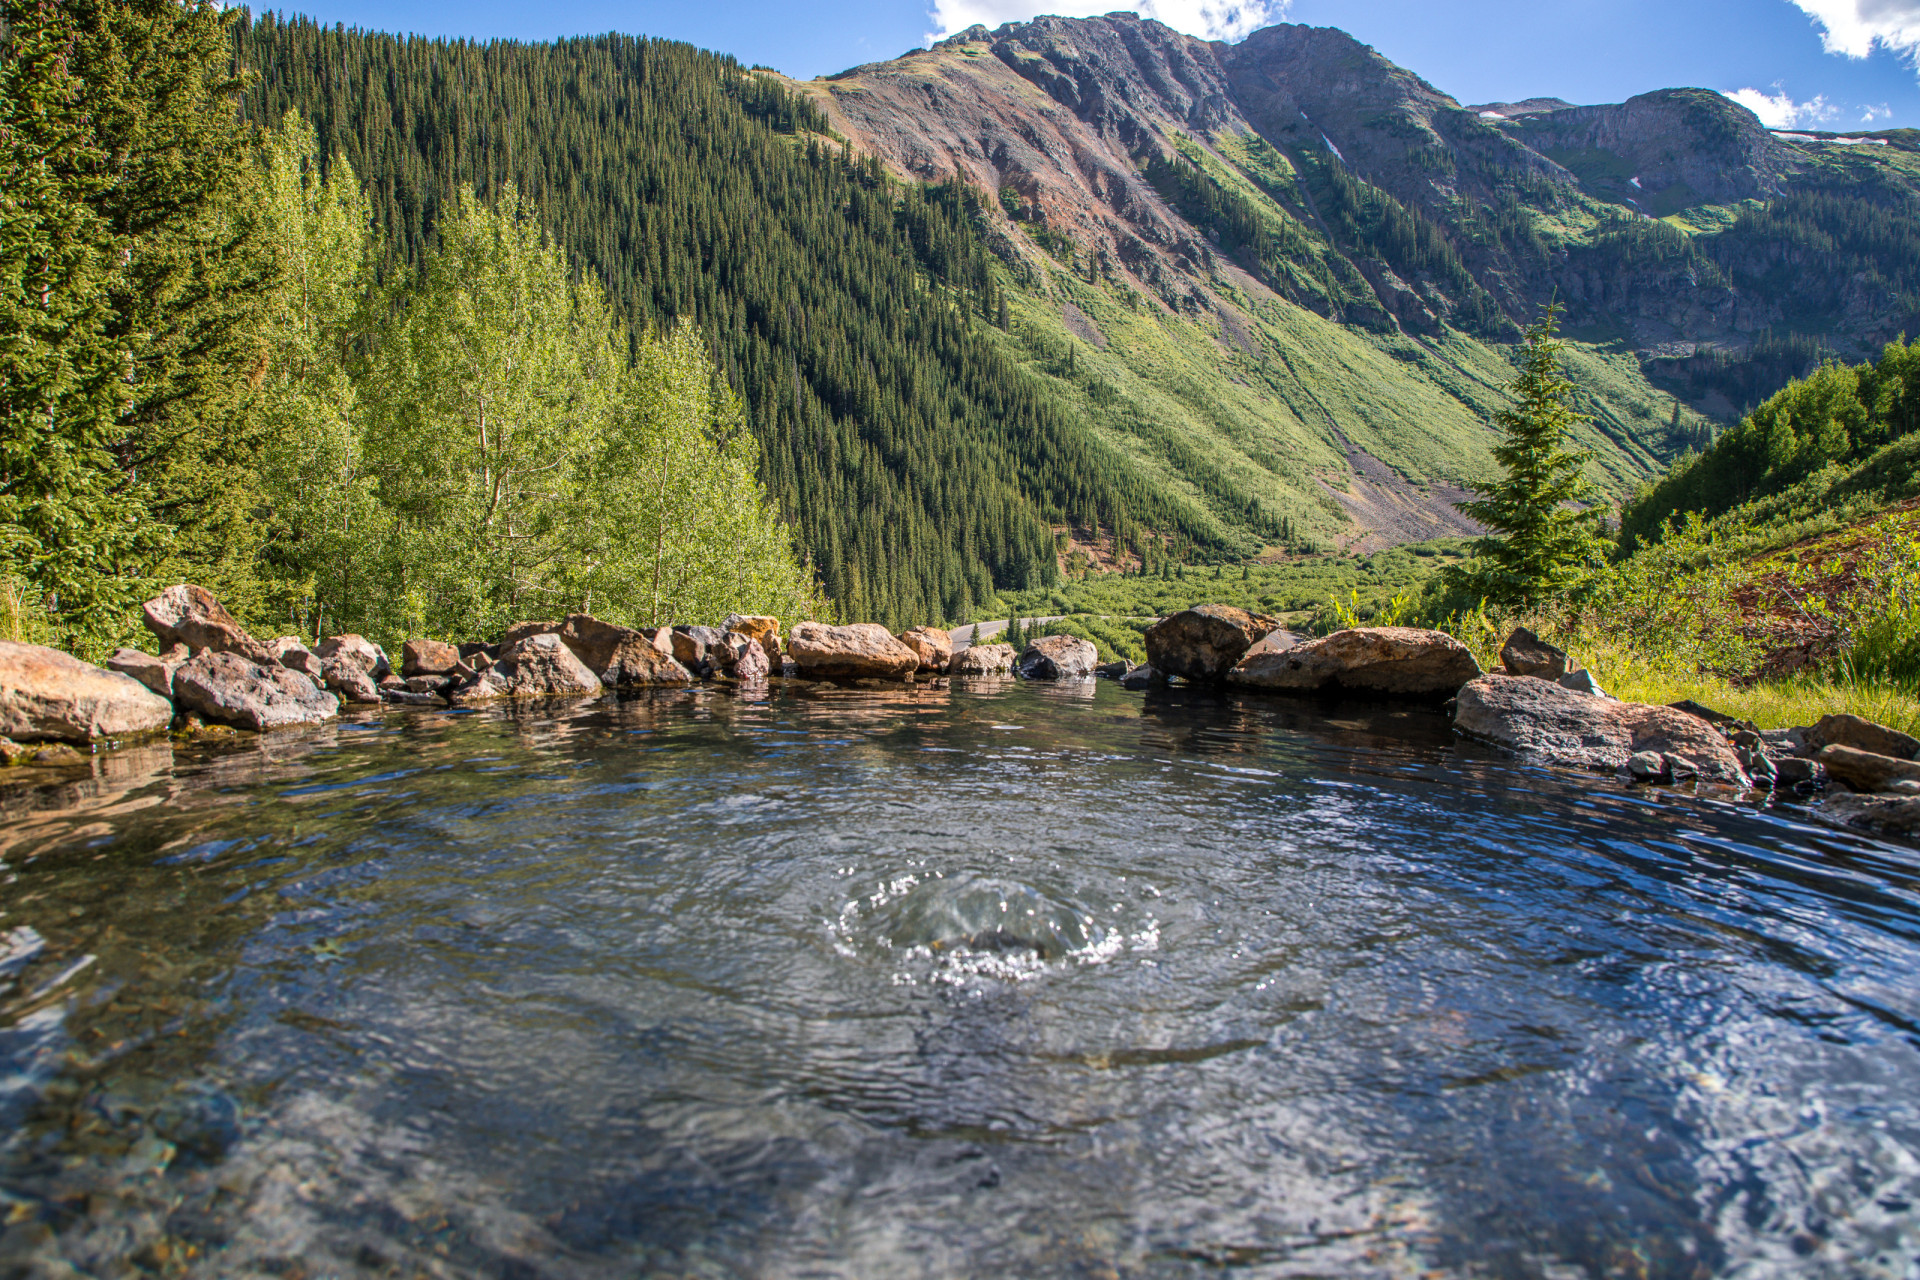 <p>When money is no object, why not rent an entire town? Dunton Hot Springs in Colorado is a former mining spot, which was once left to rot but has been restored to luxury status.</p><p>You may also like:<a href="https://www.starsinsider.com/n/287880?utm_source=msn.com&utm_medium=display&utm_campaign=referral_description&utm_content=555492en-us"> Life in all its glory, hilarity, and oddities</a></p>